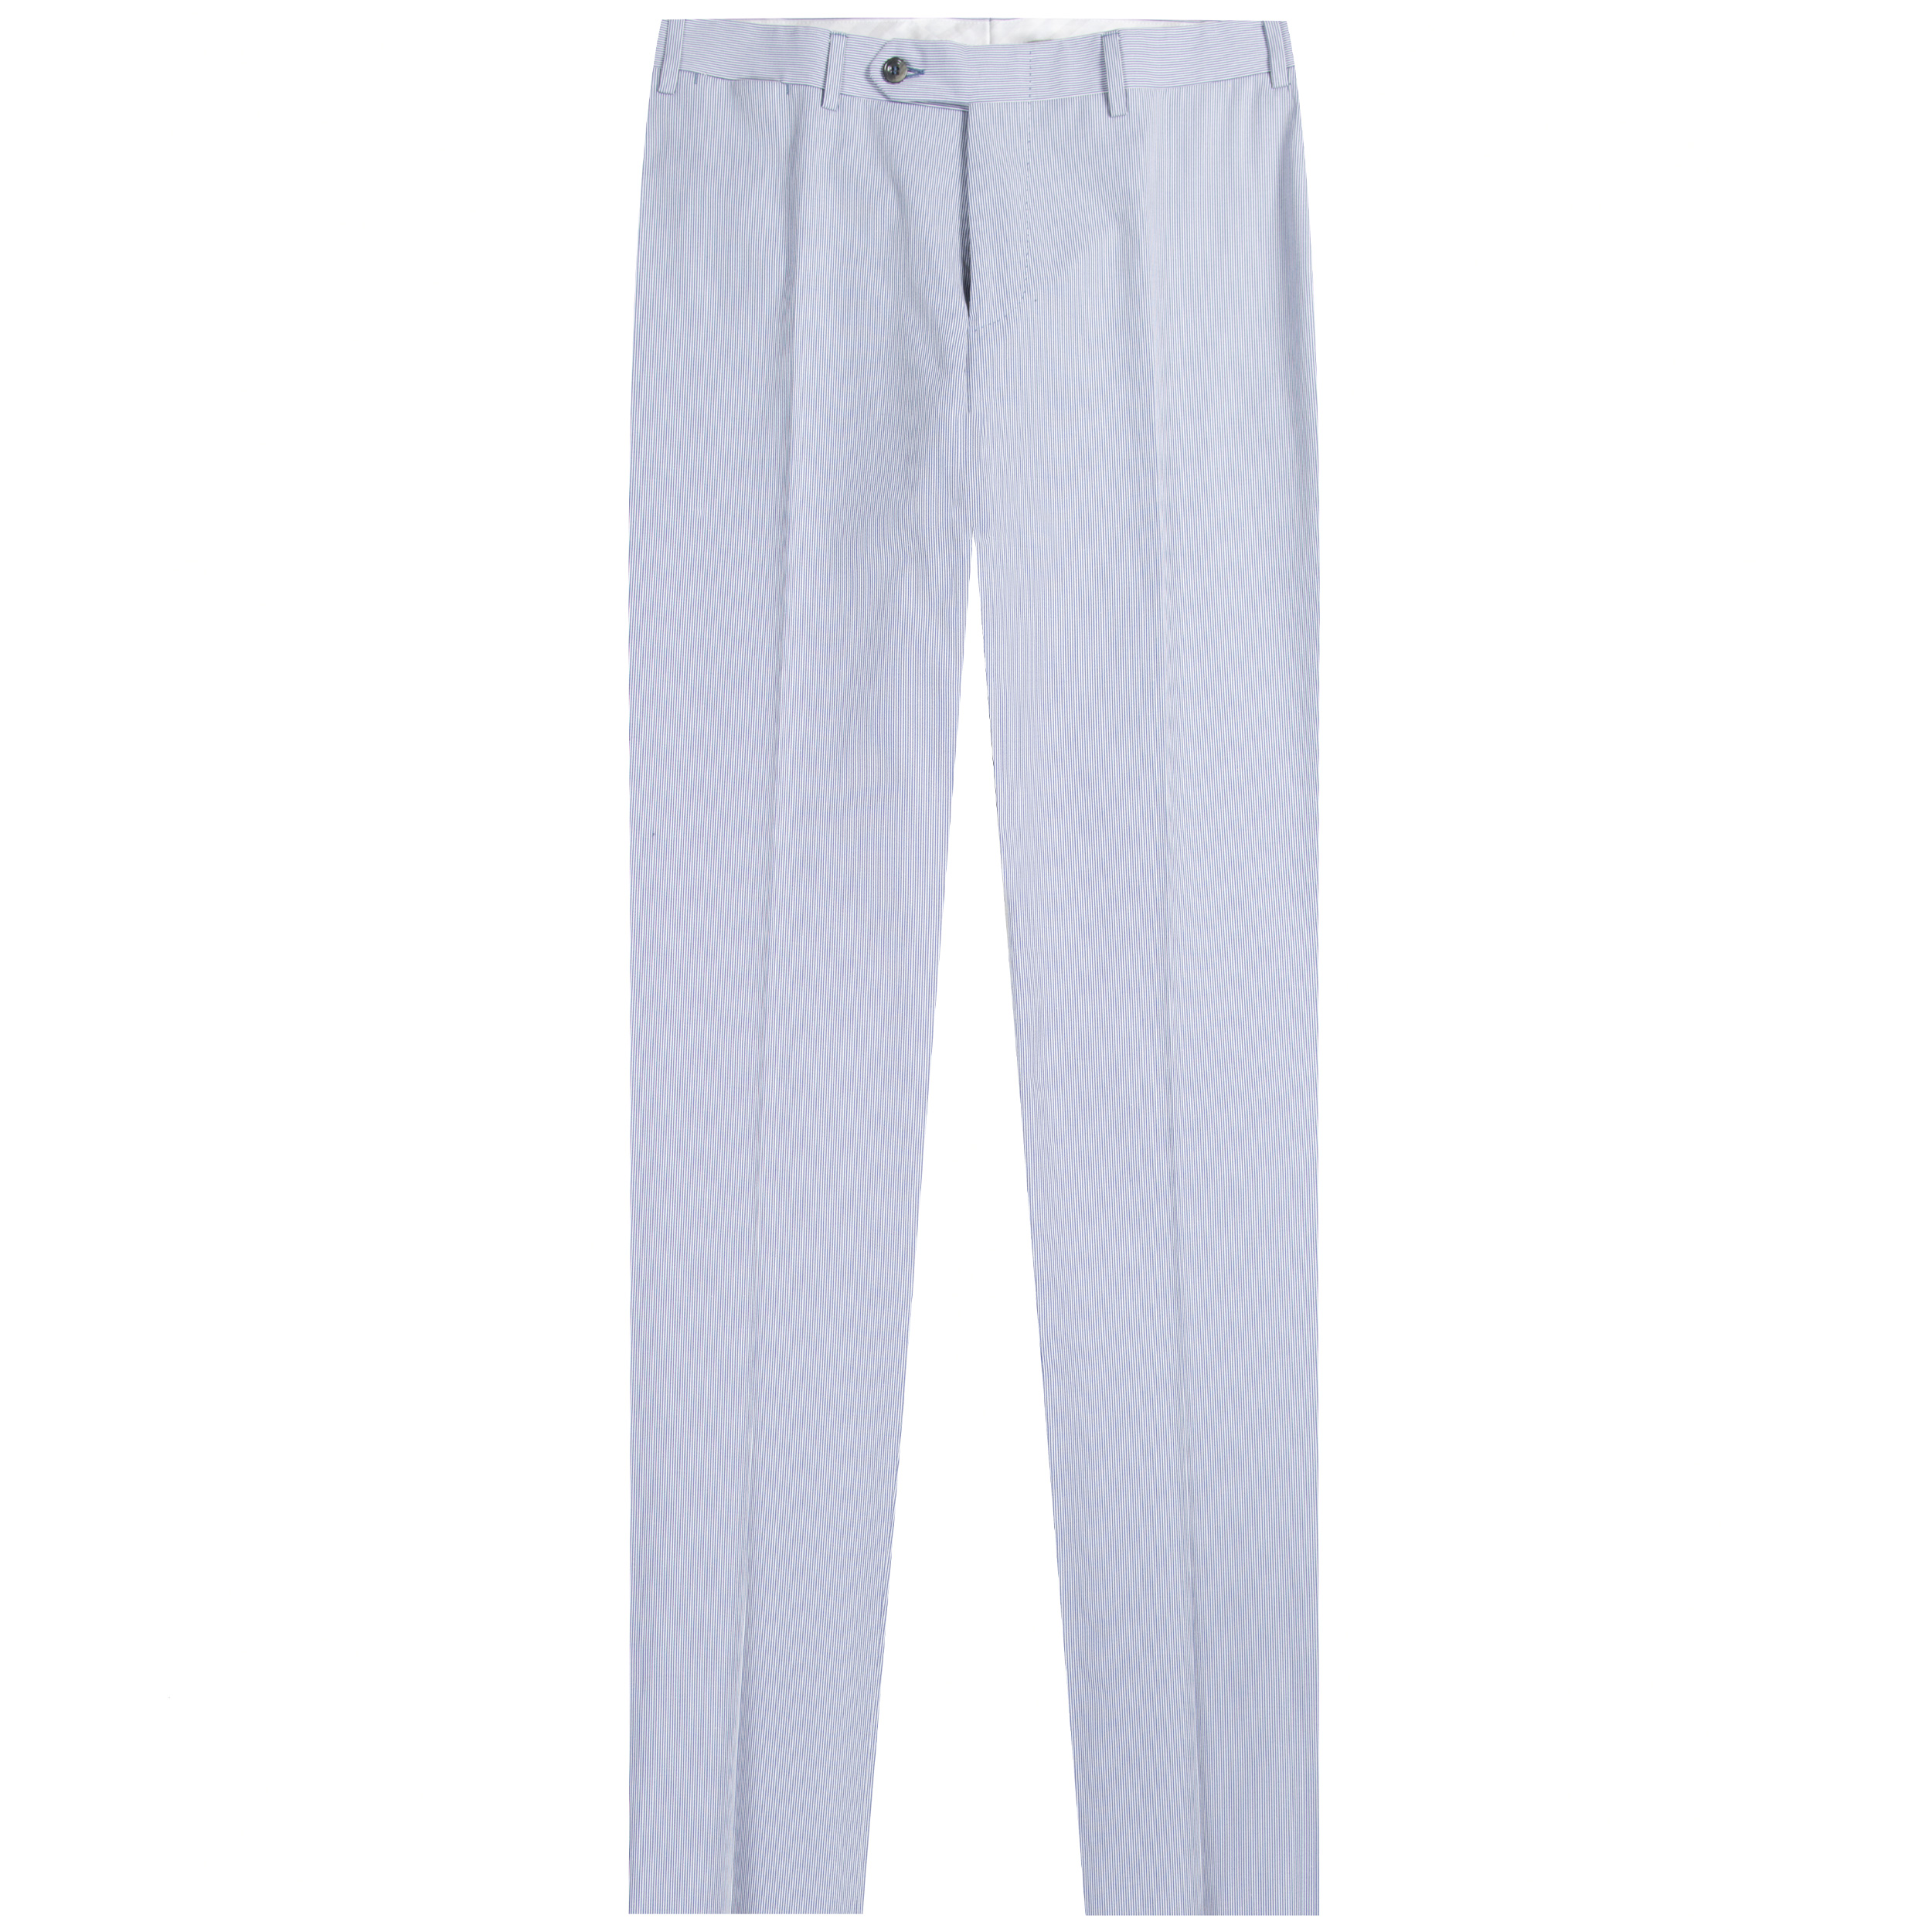 Canali Hairline Striped Trouser Navy/White